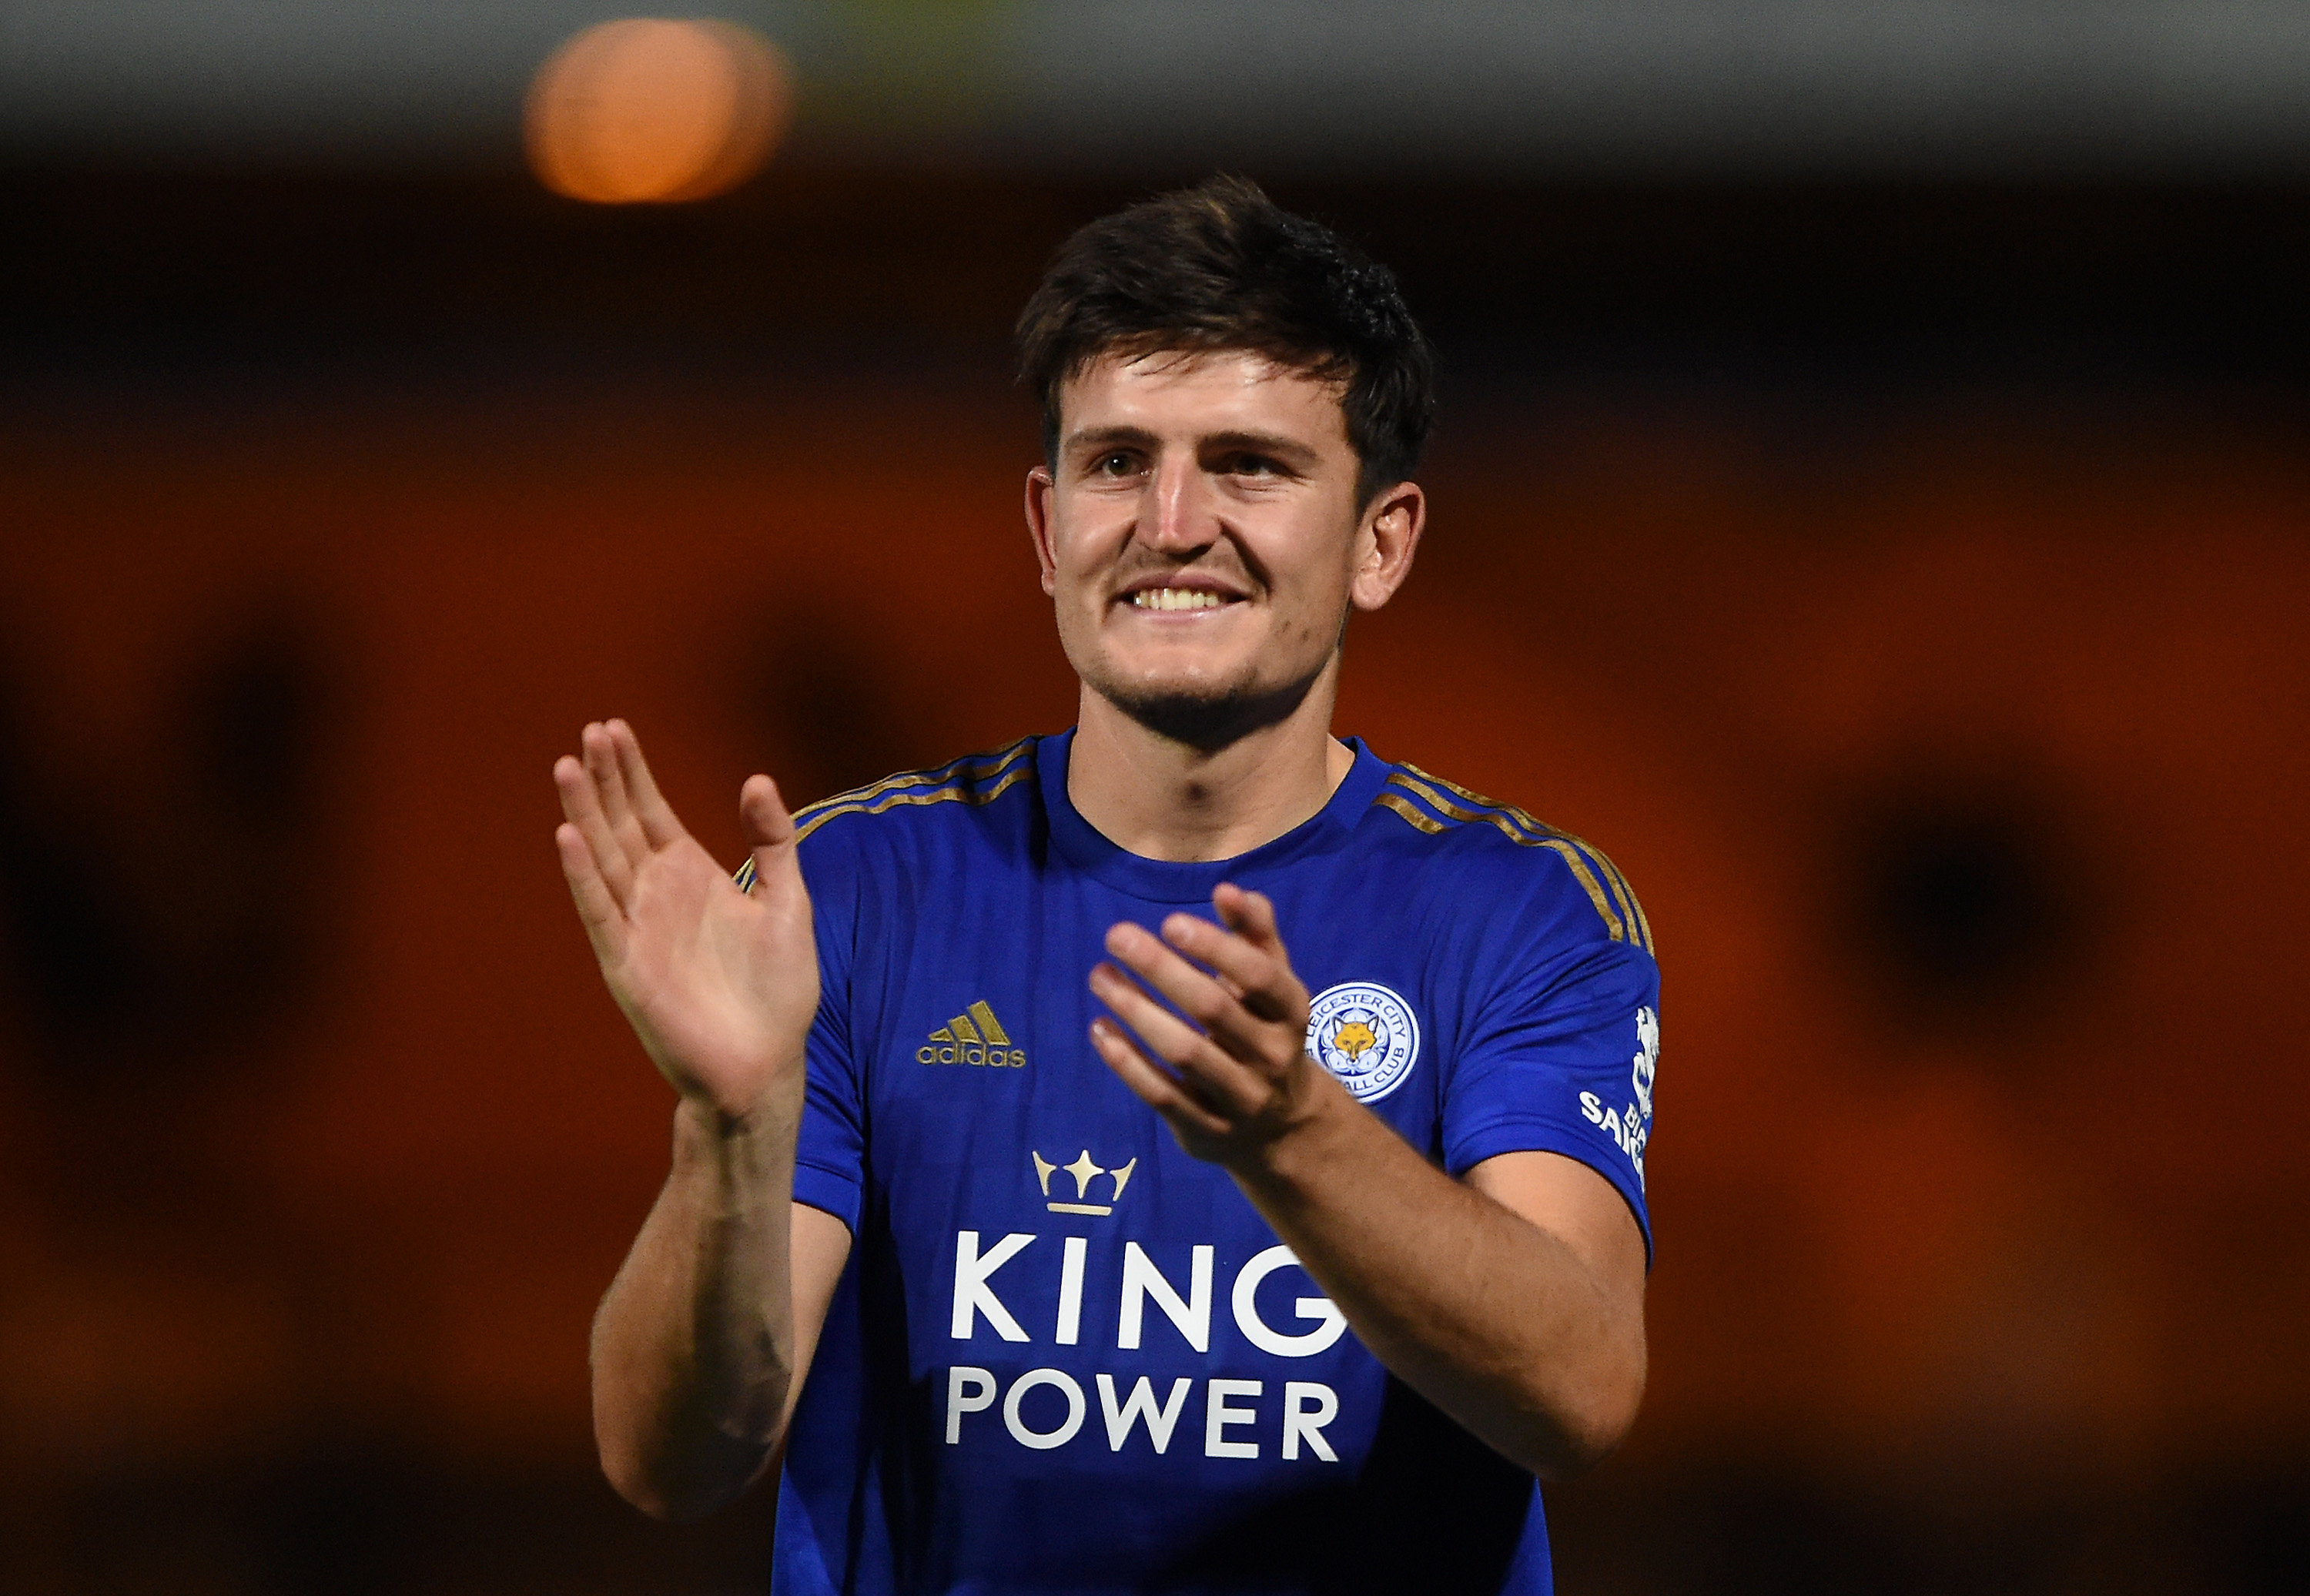 CAMBRIDGE, ENGLAND - JULY 23: Harry Maguire of Leicester City applauds fans after the Pre-Season Friendly match between Cambridge United and Leicester City at Abbey Stadium on July 23, 2019 in Cambridge, England. (Photo by Harriet Lander/Getty Images)